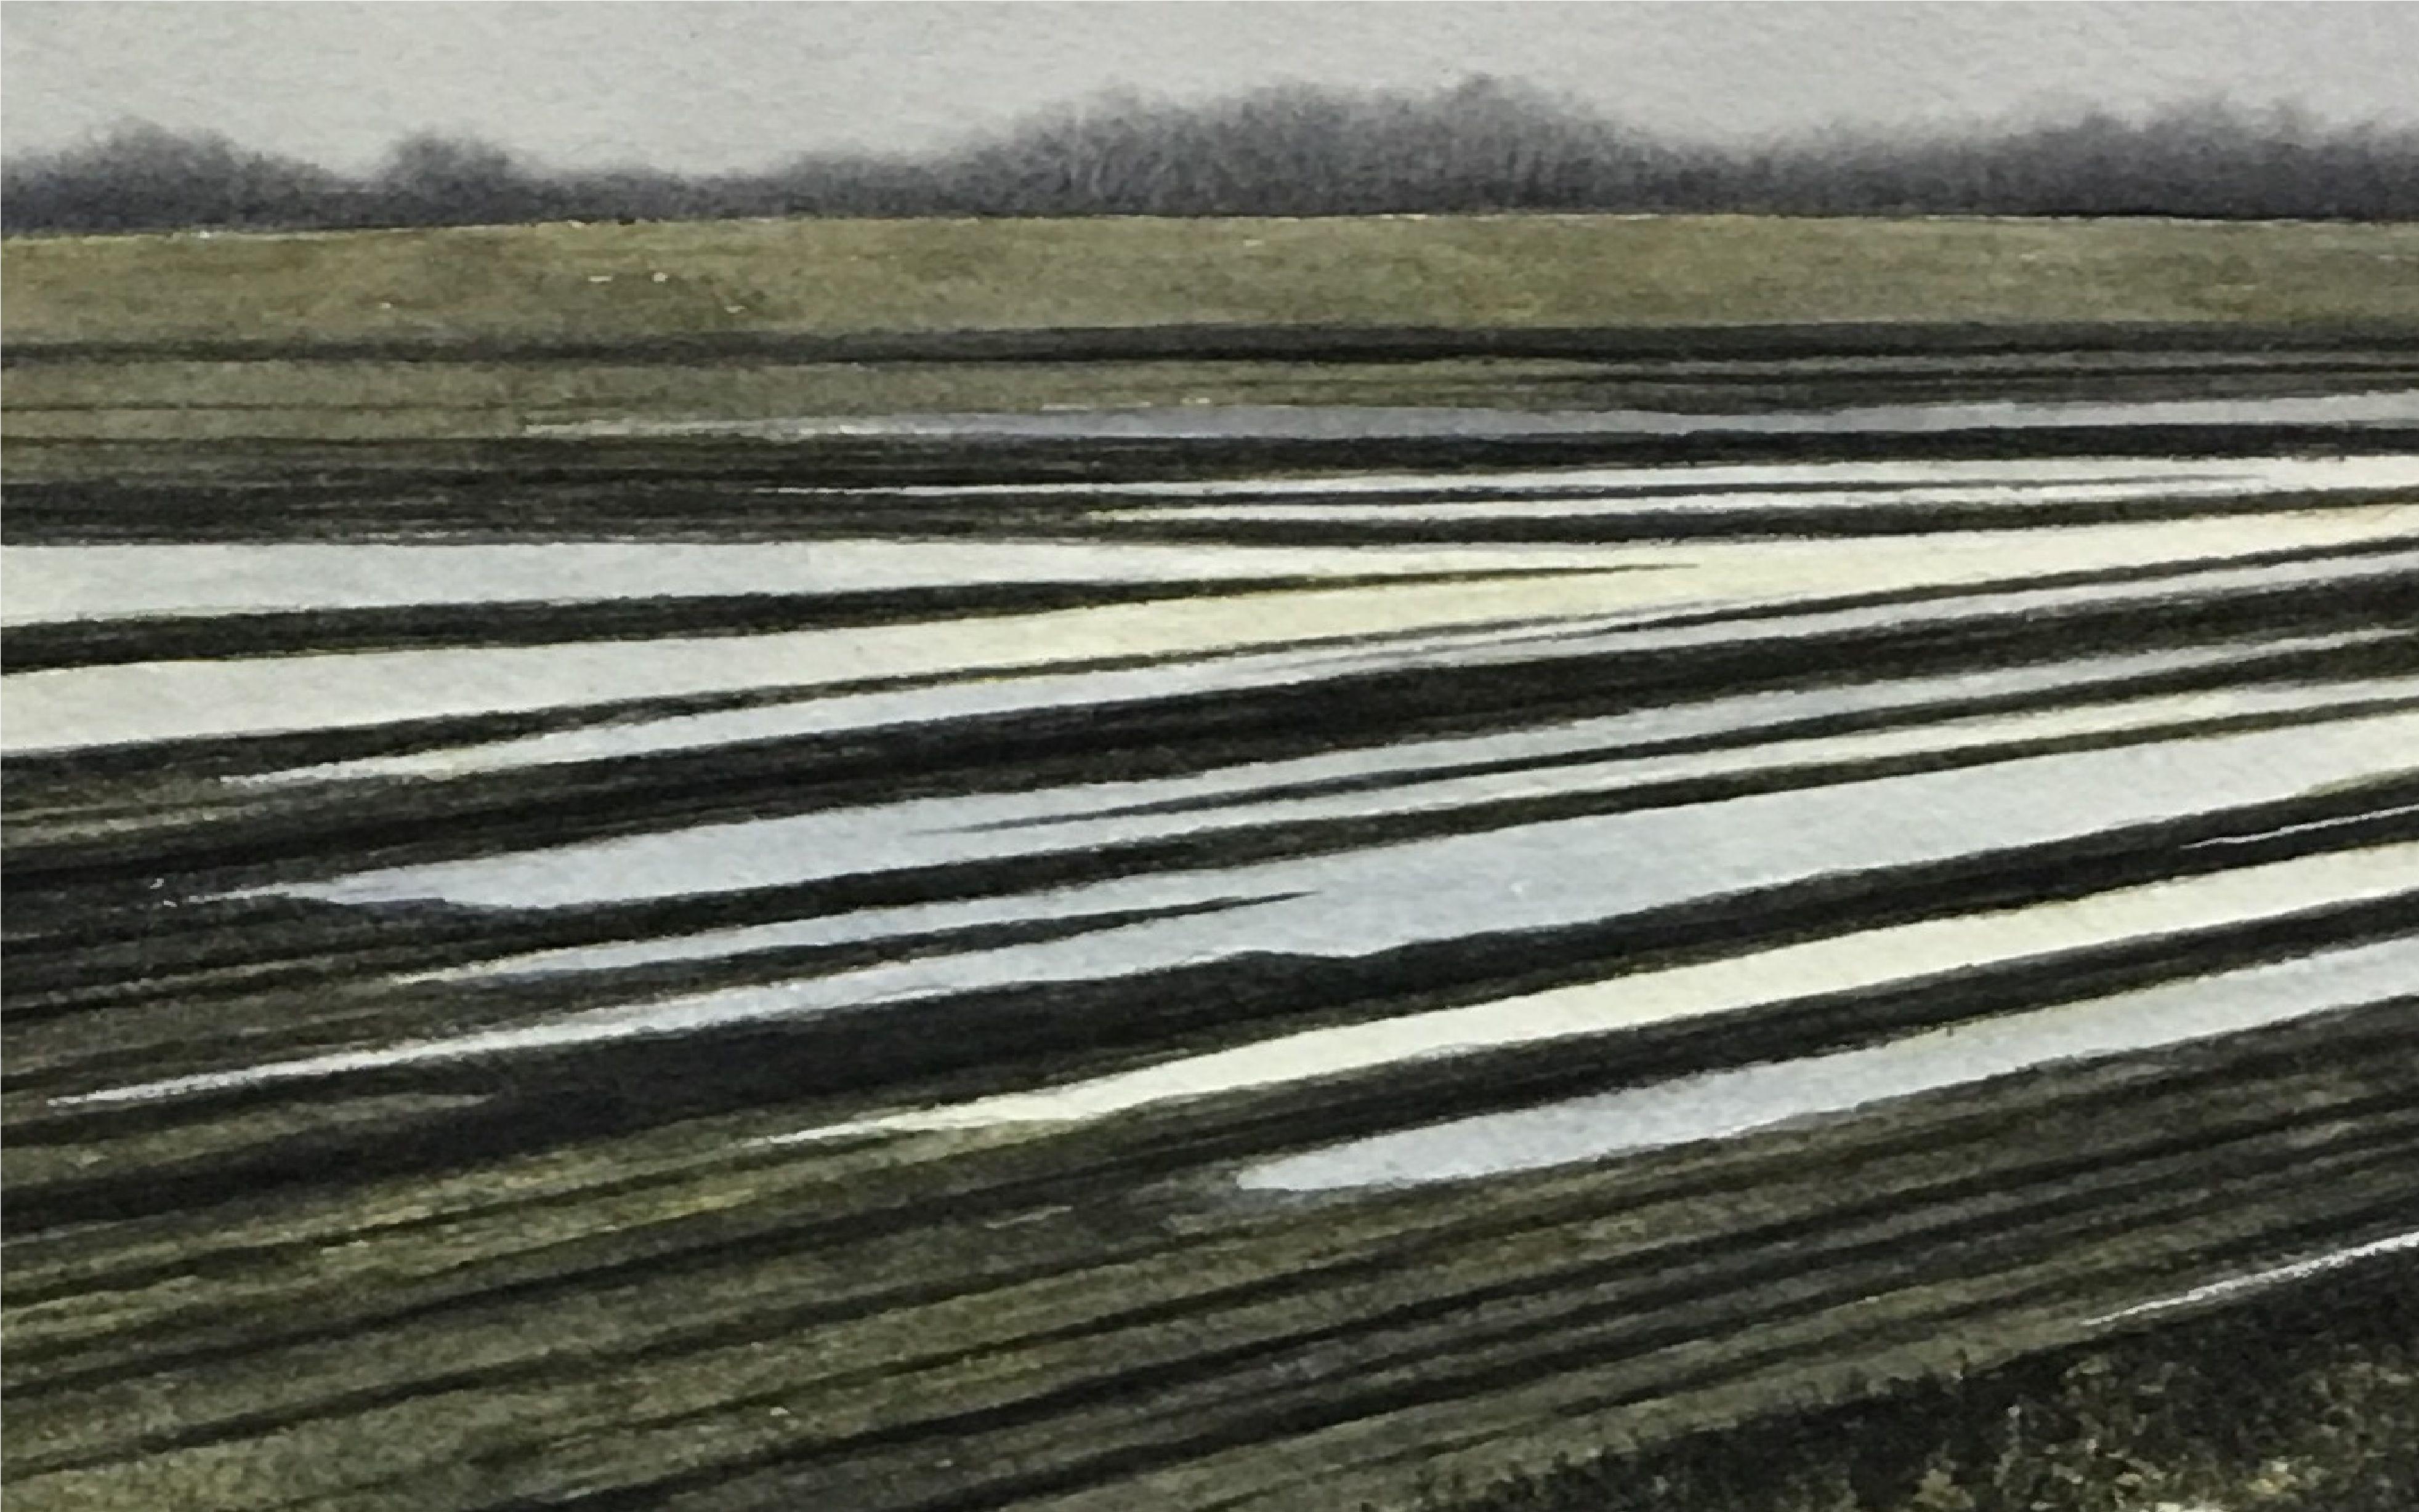 Strong melting snow patterns in a farmers field creating a sense of perspective and distance.  All paintings are completed on 140 to 300lb acid free watercolour paper and using the best artist quality watercolour paints. :: Painting :: Realism ::